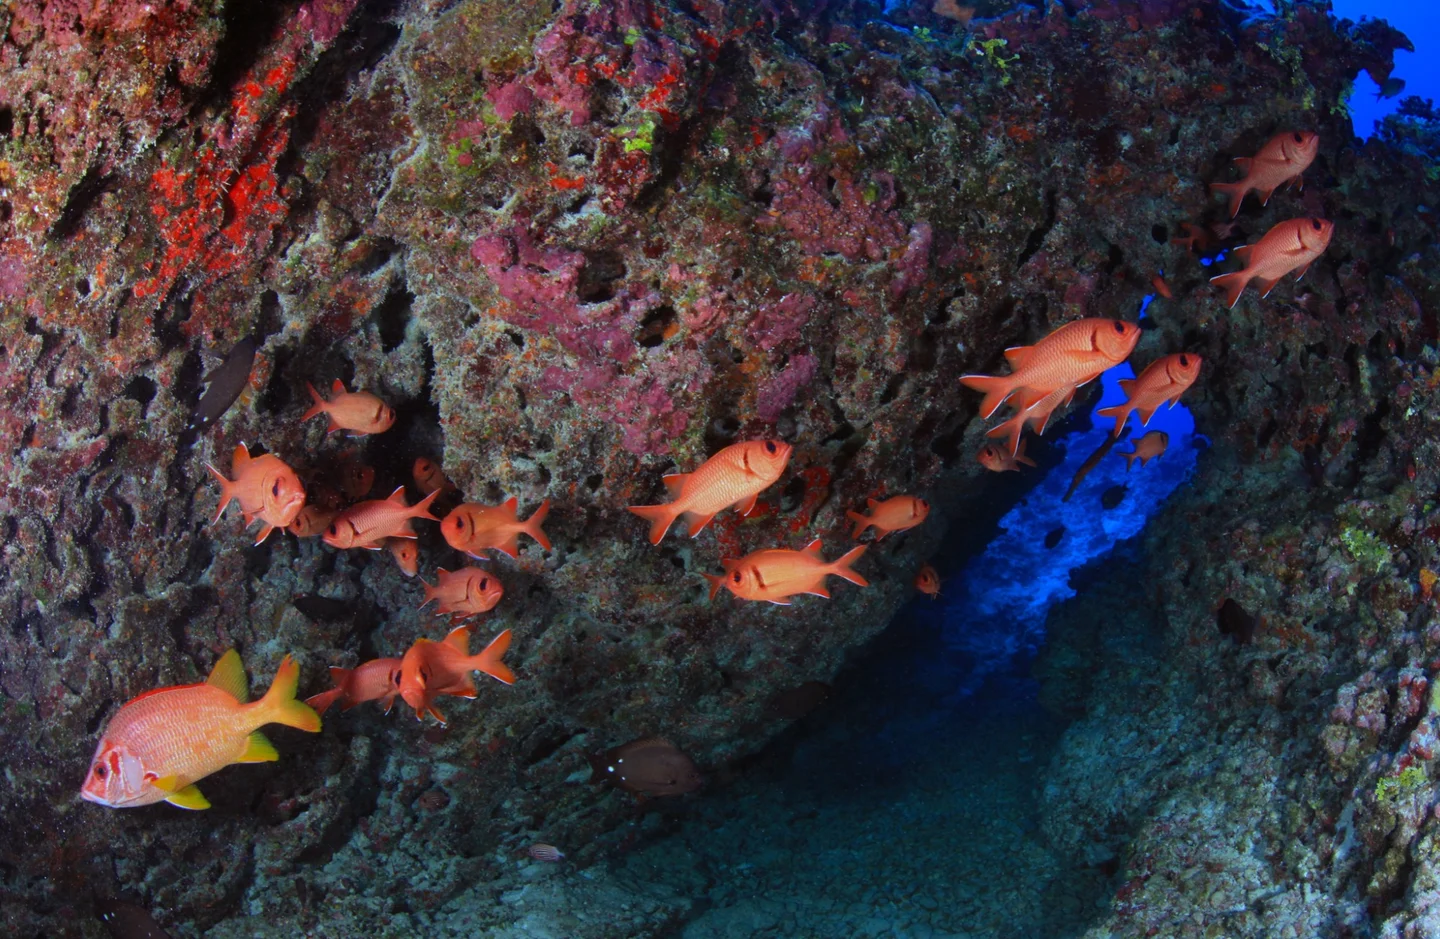 Fish populations thrive near marine protected areas—and so do fishers